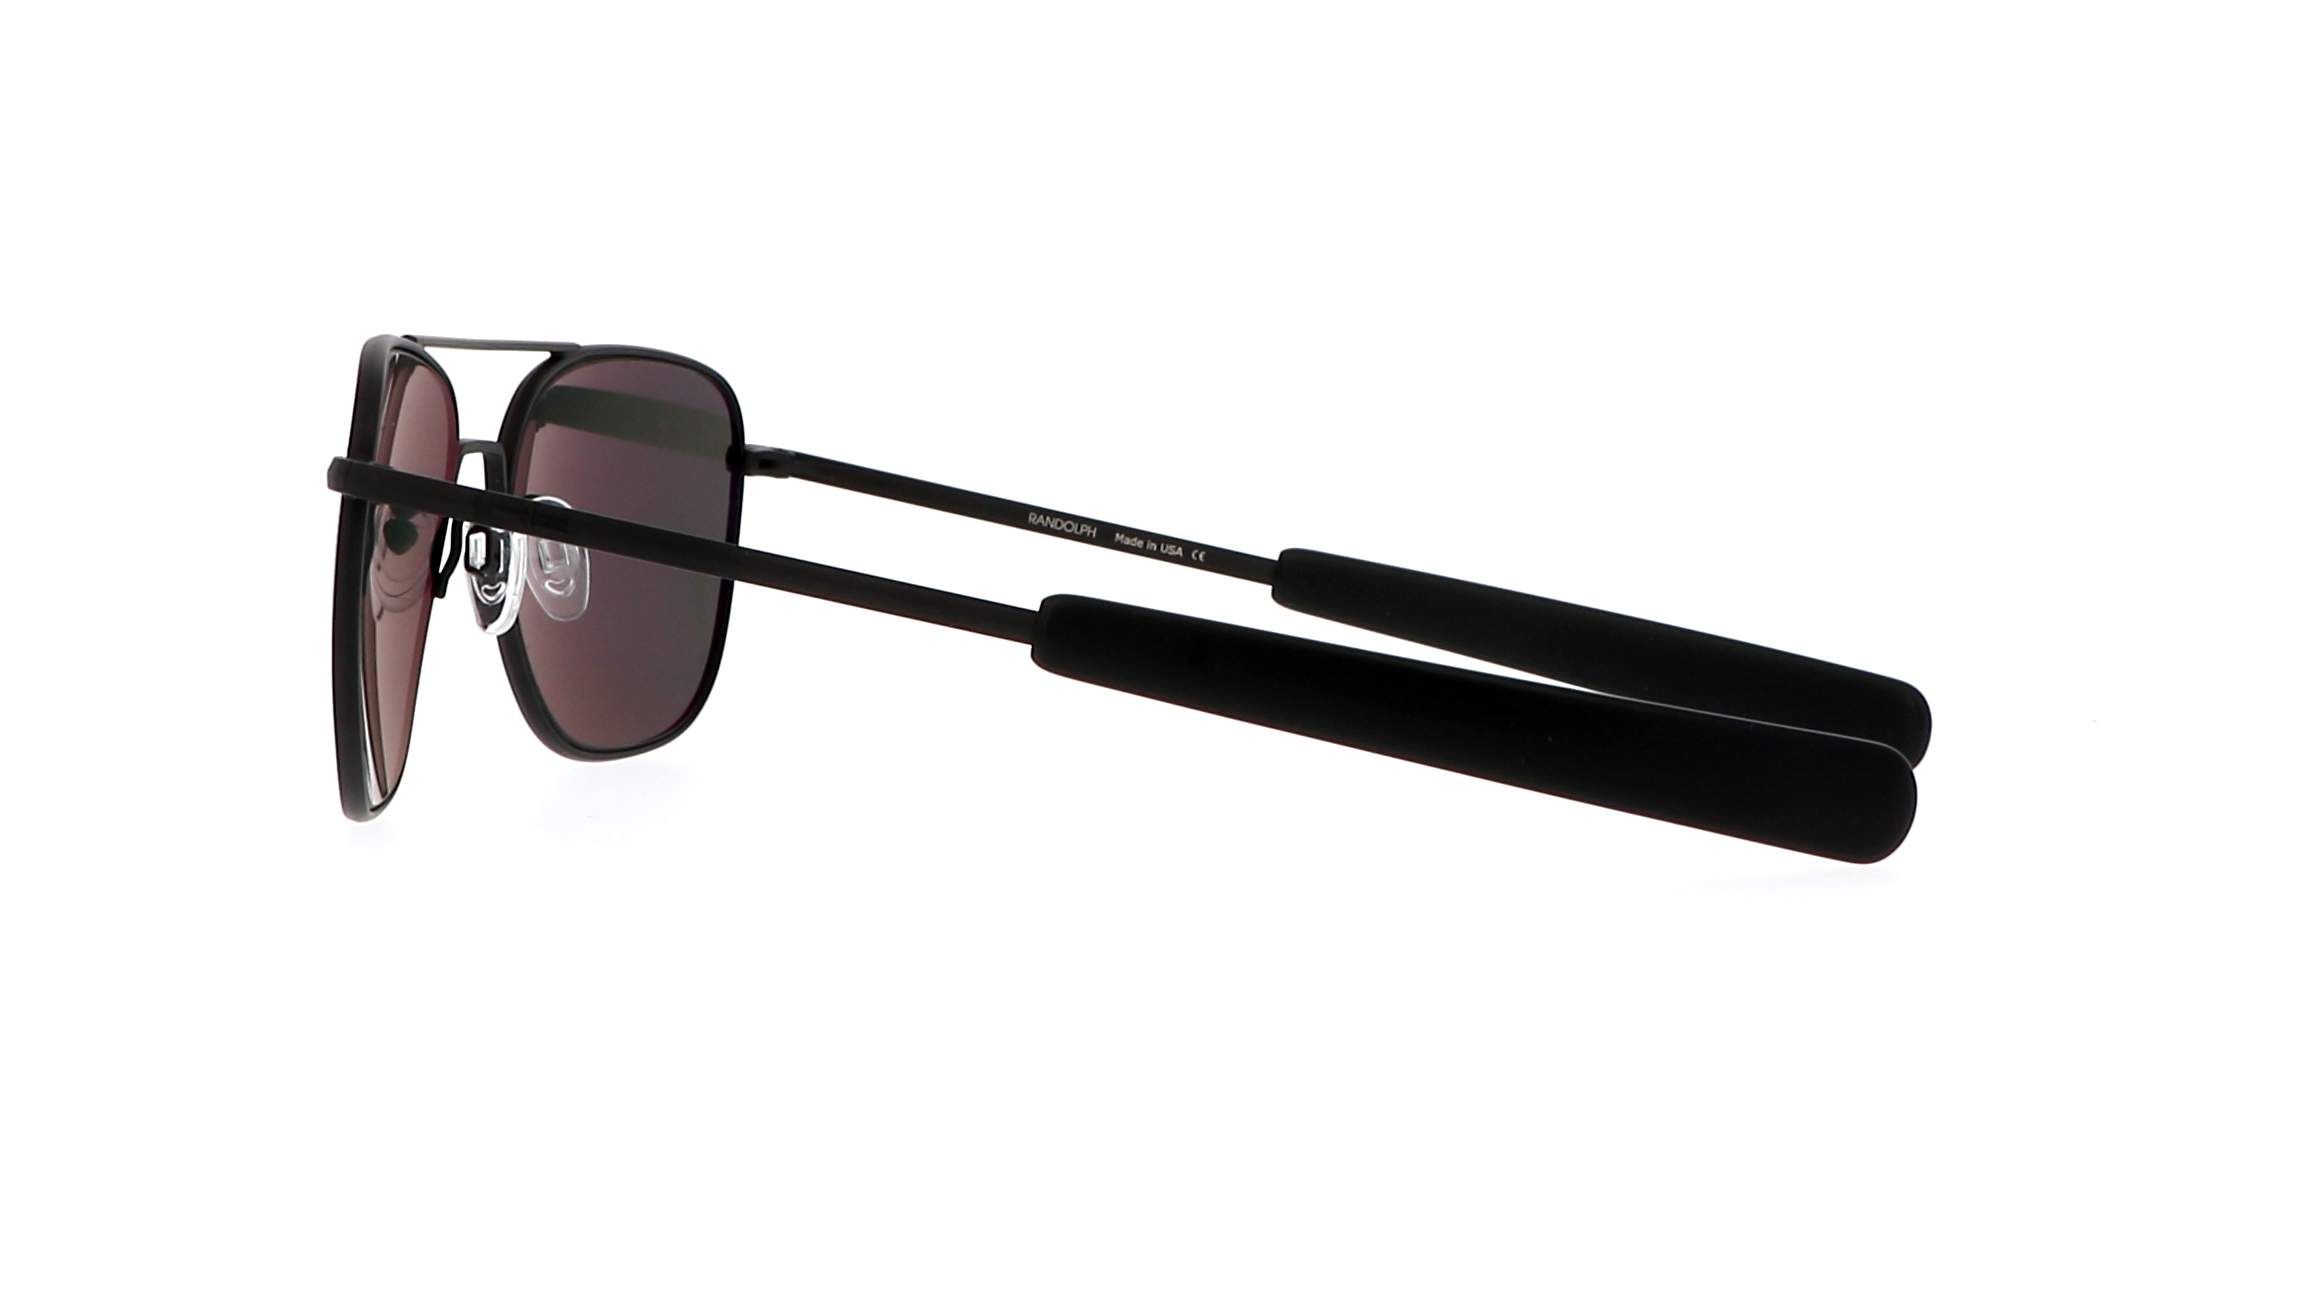 Sunglasses Randolph Aviator Military Special Edition Af321 55 20 Black In Stock Price 249 92